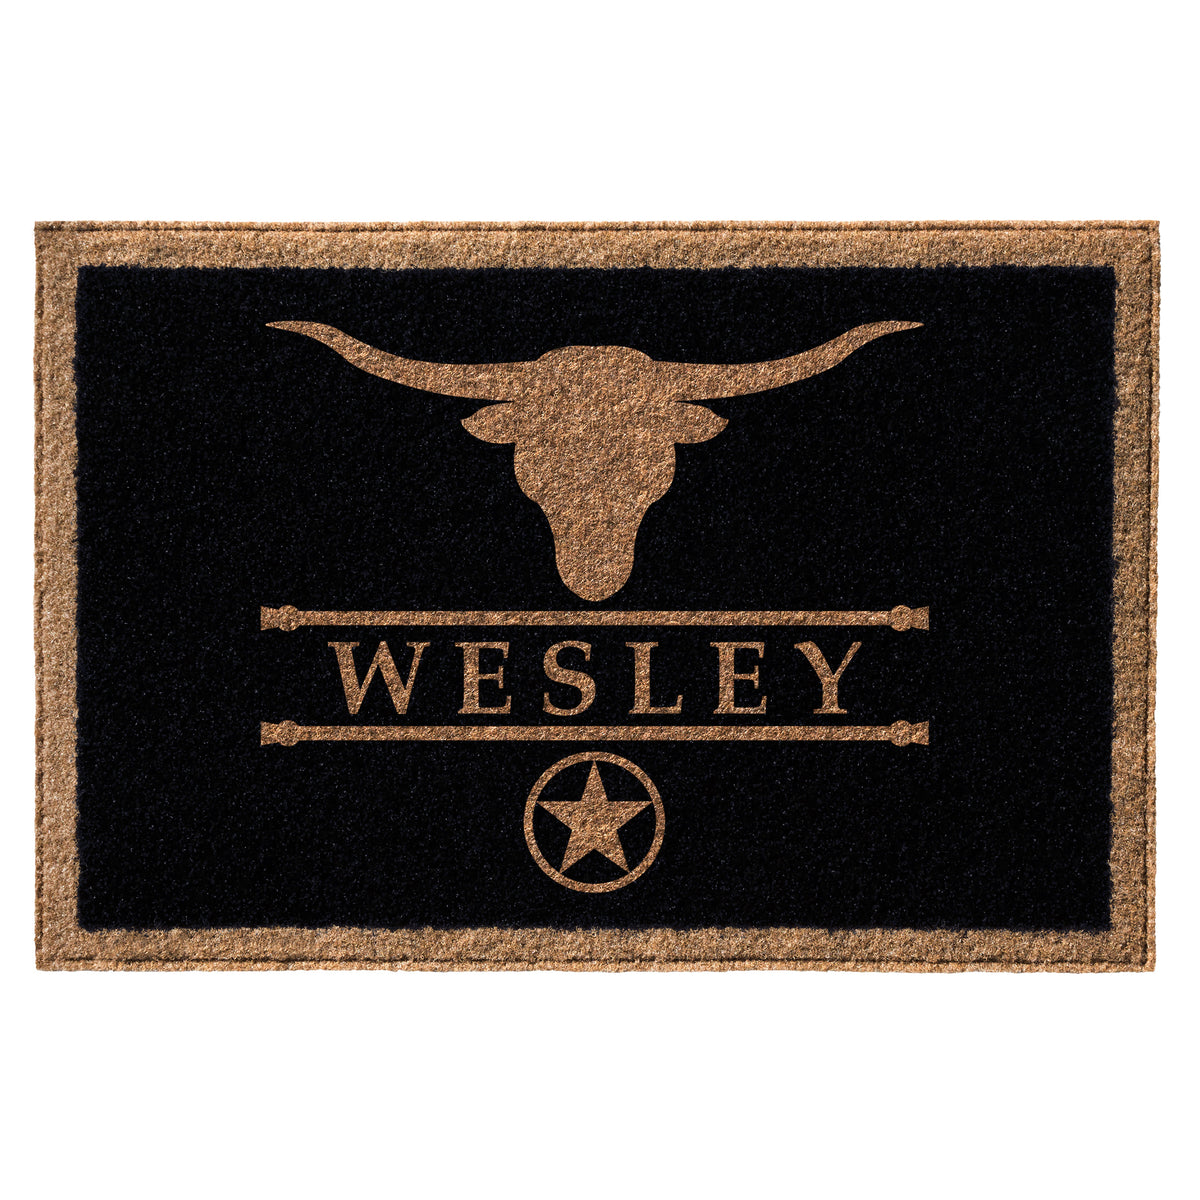 Infinity Custom Mats™ All-Weather Personalized Door Mat - STYLE: WESLEY COLOR:BLACK - rugsthatfit.com